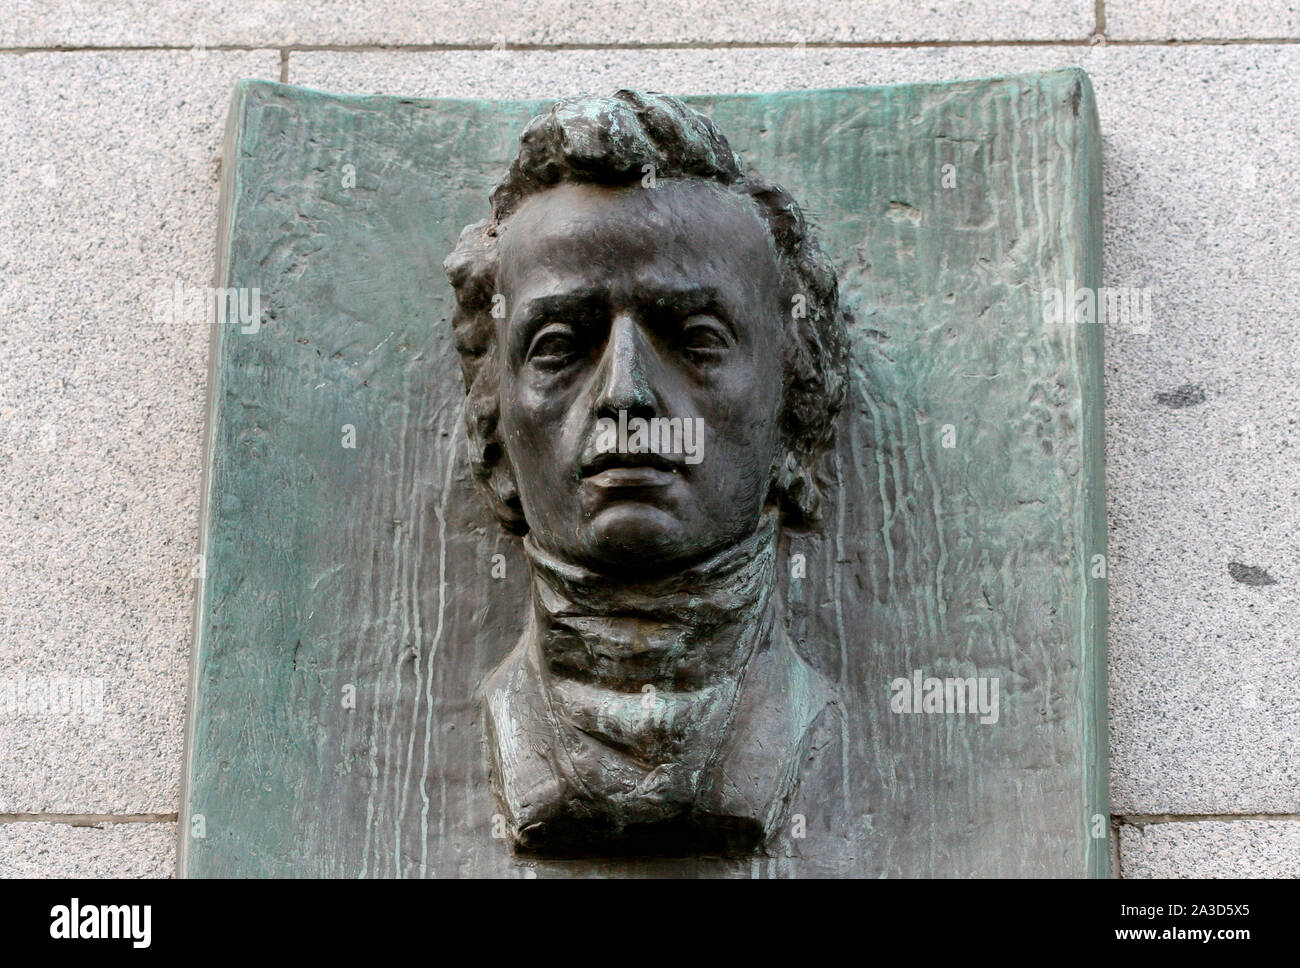 Frederic Chopin (1810-1849). Polish composer and virtuoso pianist of the Romantic era. Commemorative plaque on wall of the Czech National Bank, house where Chopin lived from 1829 to 1830 in the city. Prague, Czech Republic. Stock Photo